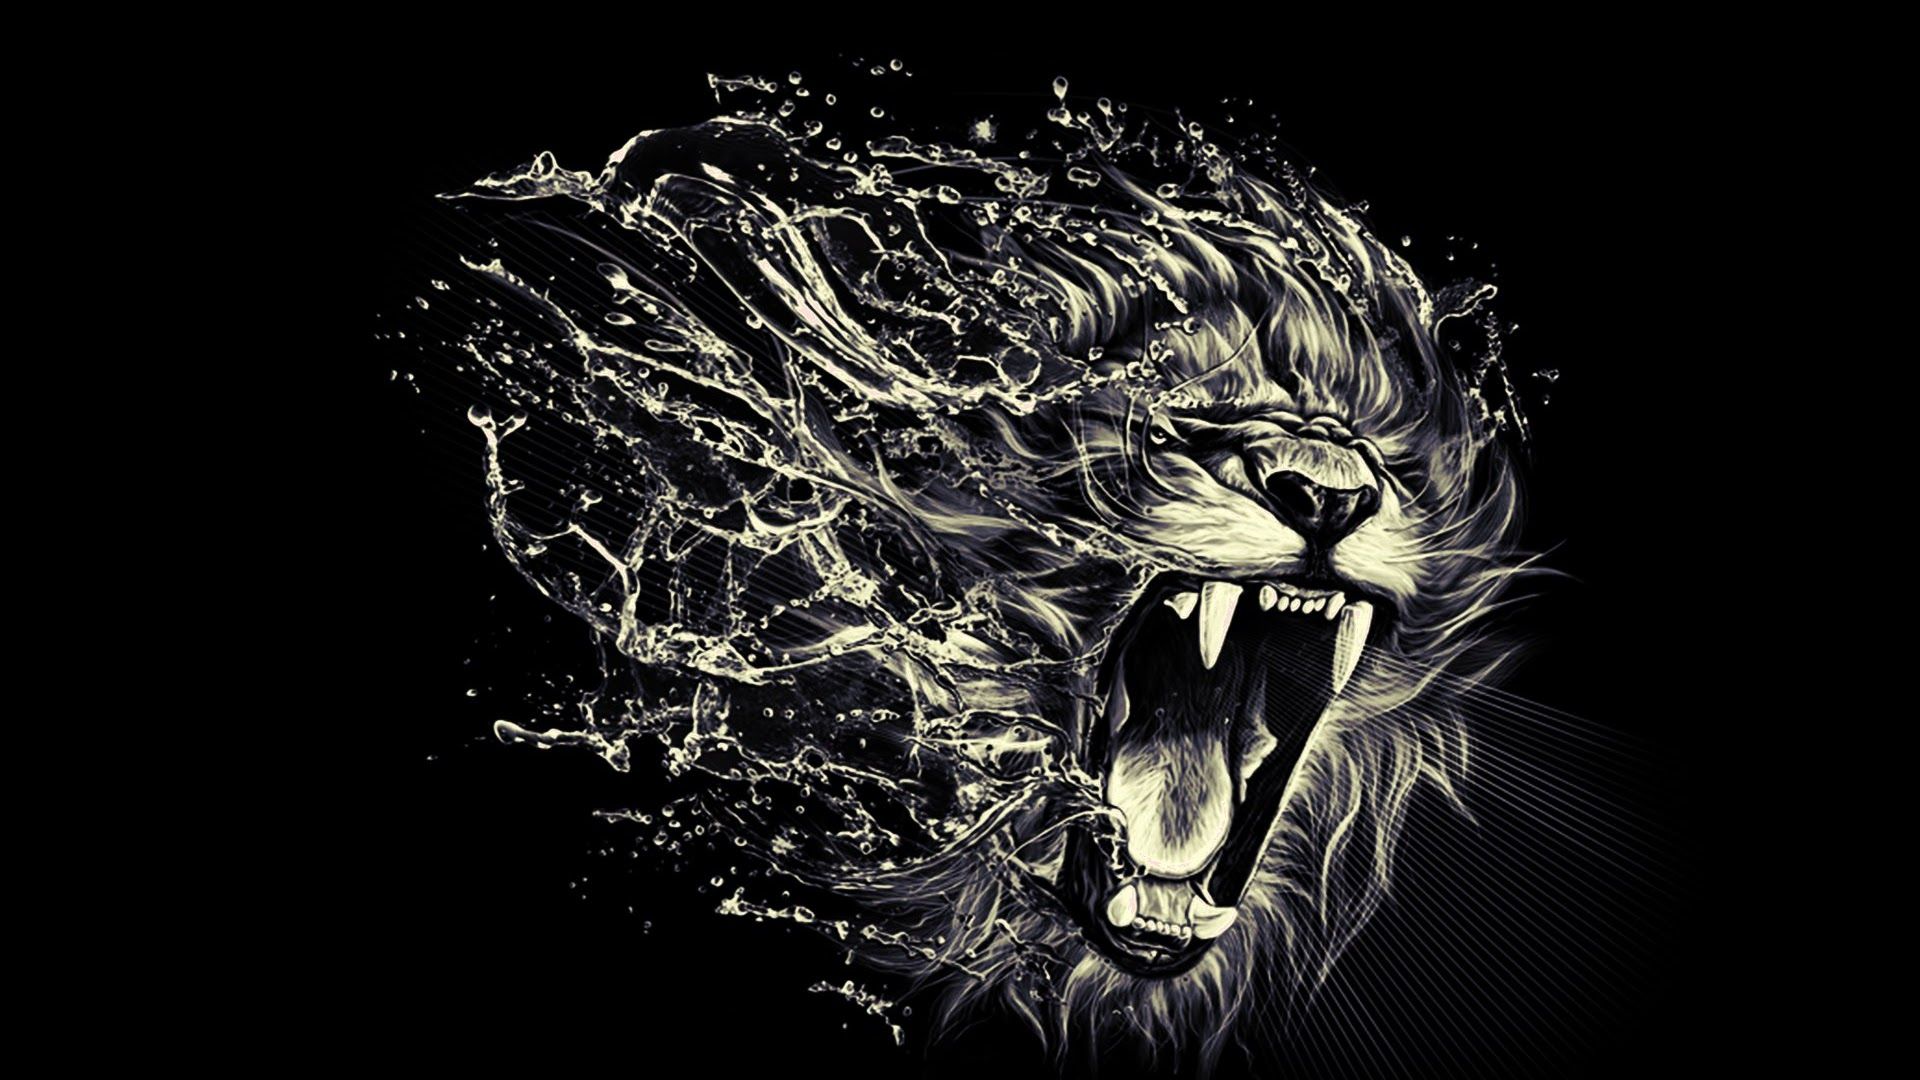 Free Lion Photo Without Text (20)